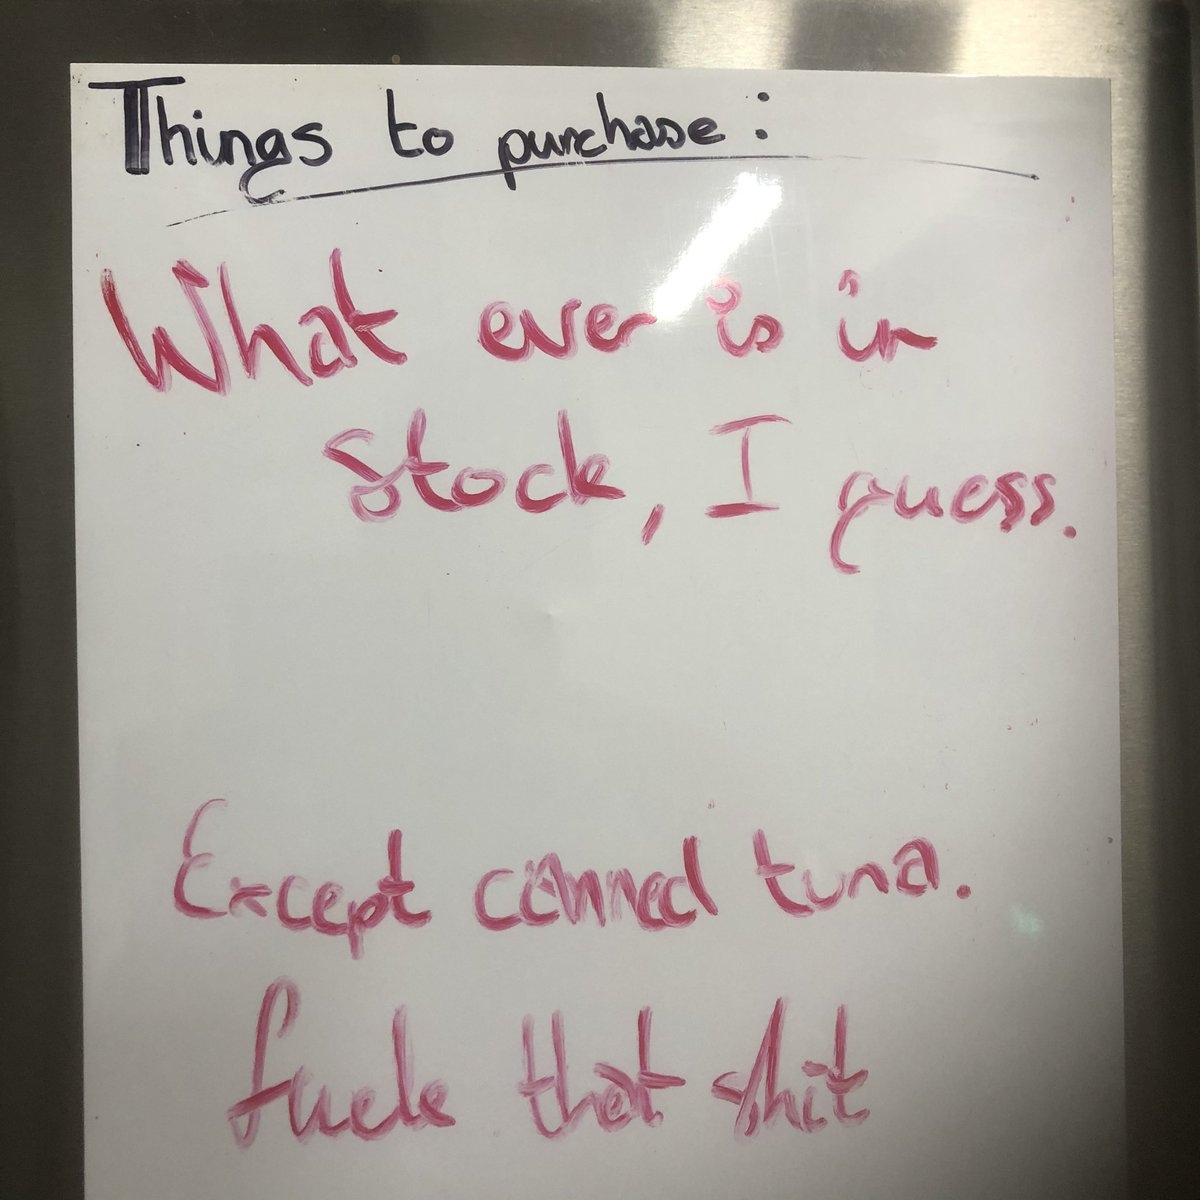 Updated the flat shopping list